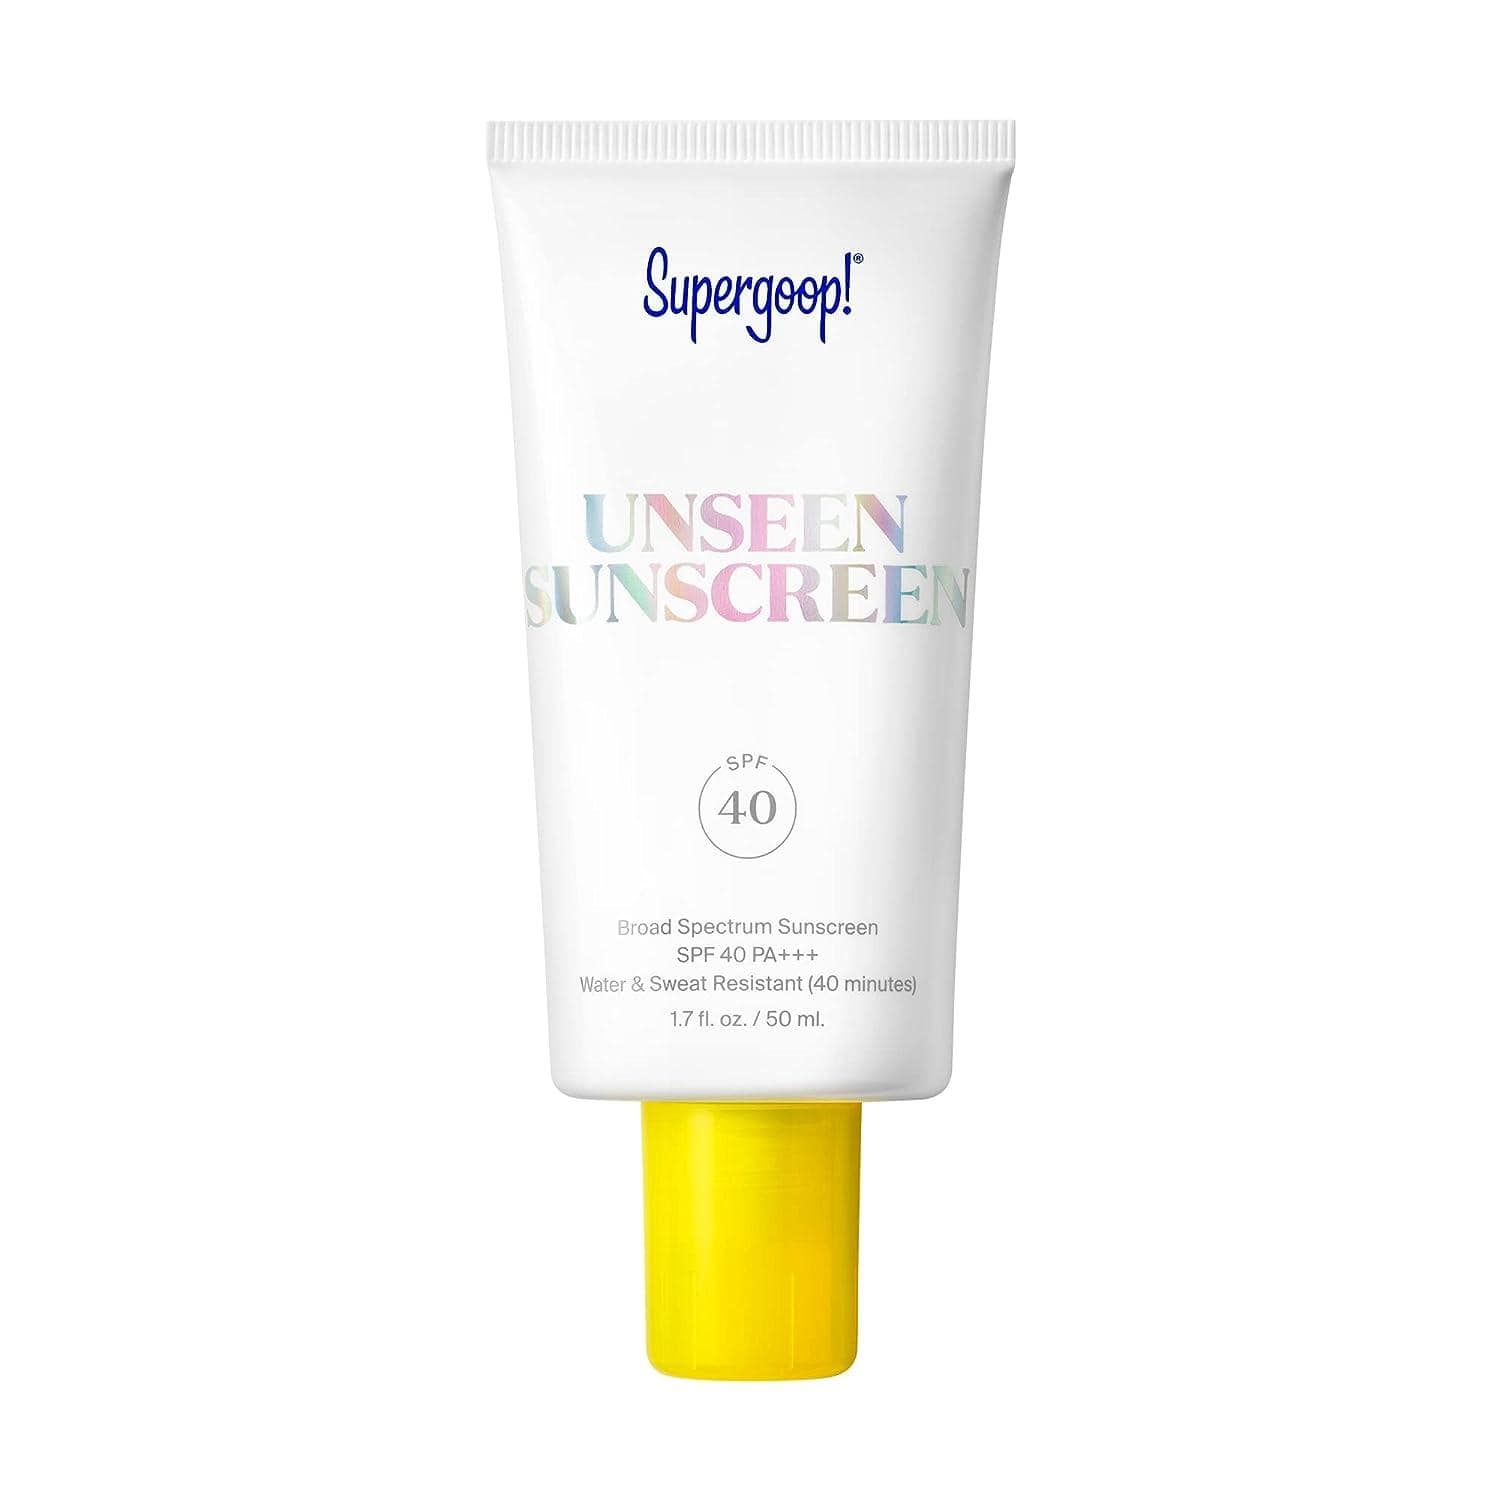 Supergoop! Unseen Sunscreen is my go-to invisible guardian. Its SPF 40, gel consistency, and silicone base make it perfect for oily skin under makeup. 